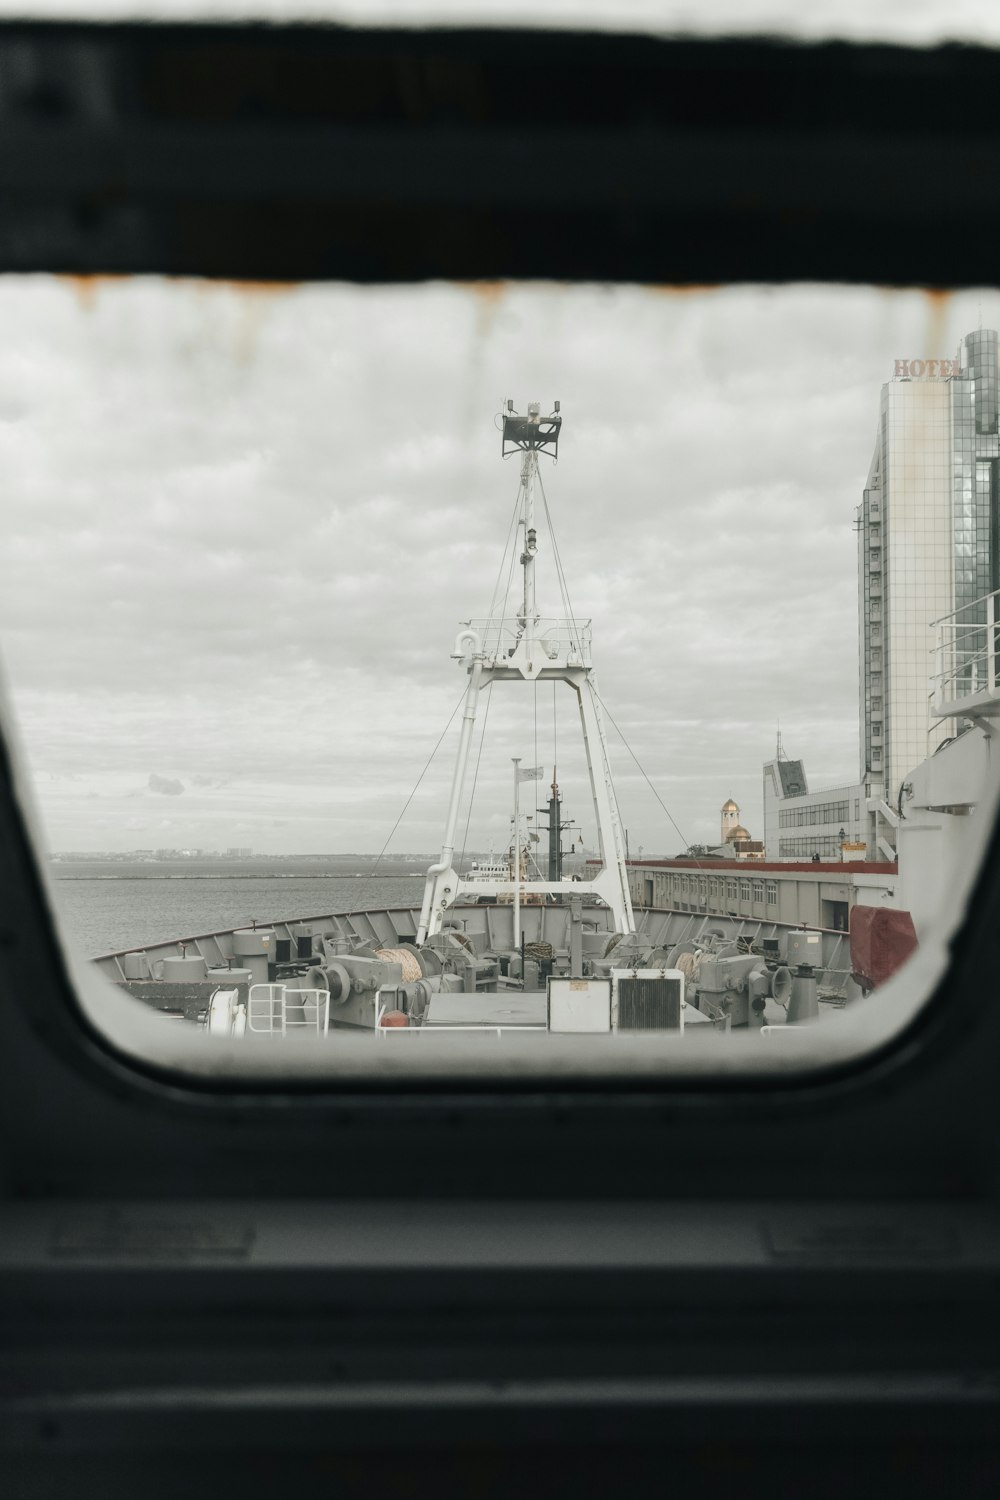 a view of a ship from inside a window